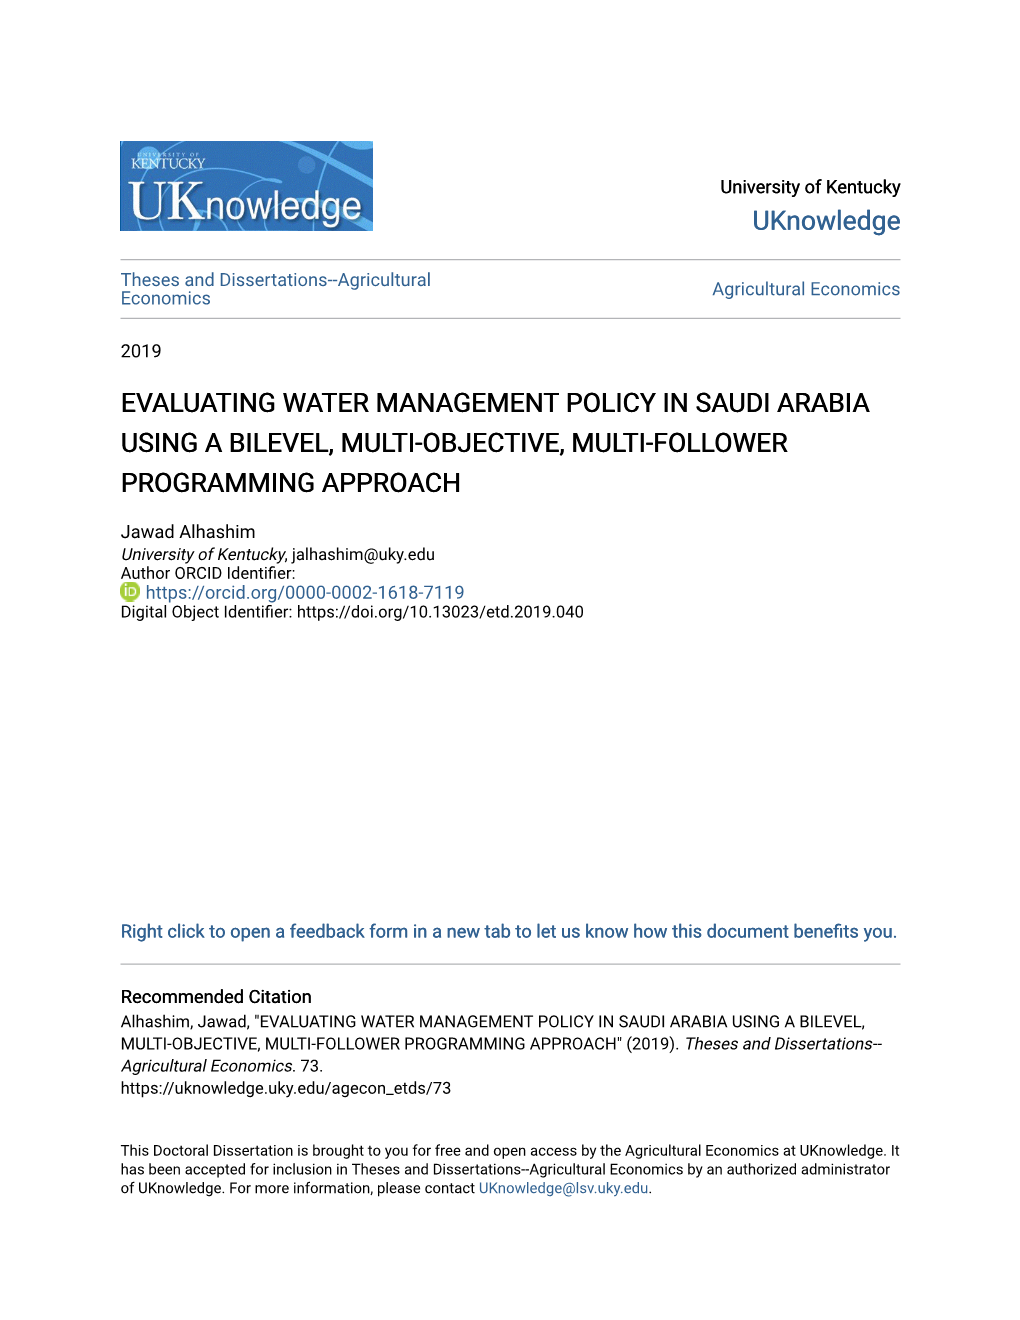 Evaluating Water Management Policy in Saudi Arabia Using a Bilevel, Multi-Objective, Multi-Follower Programming Approach